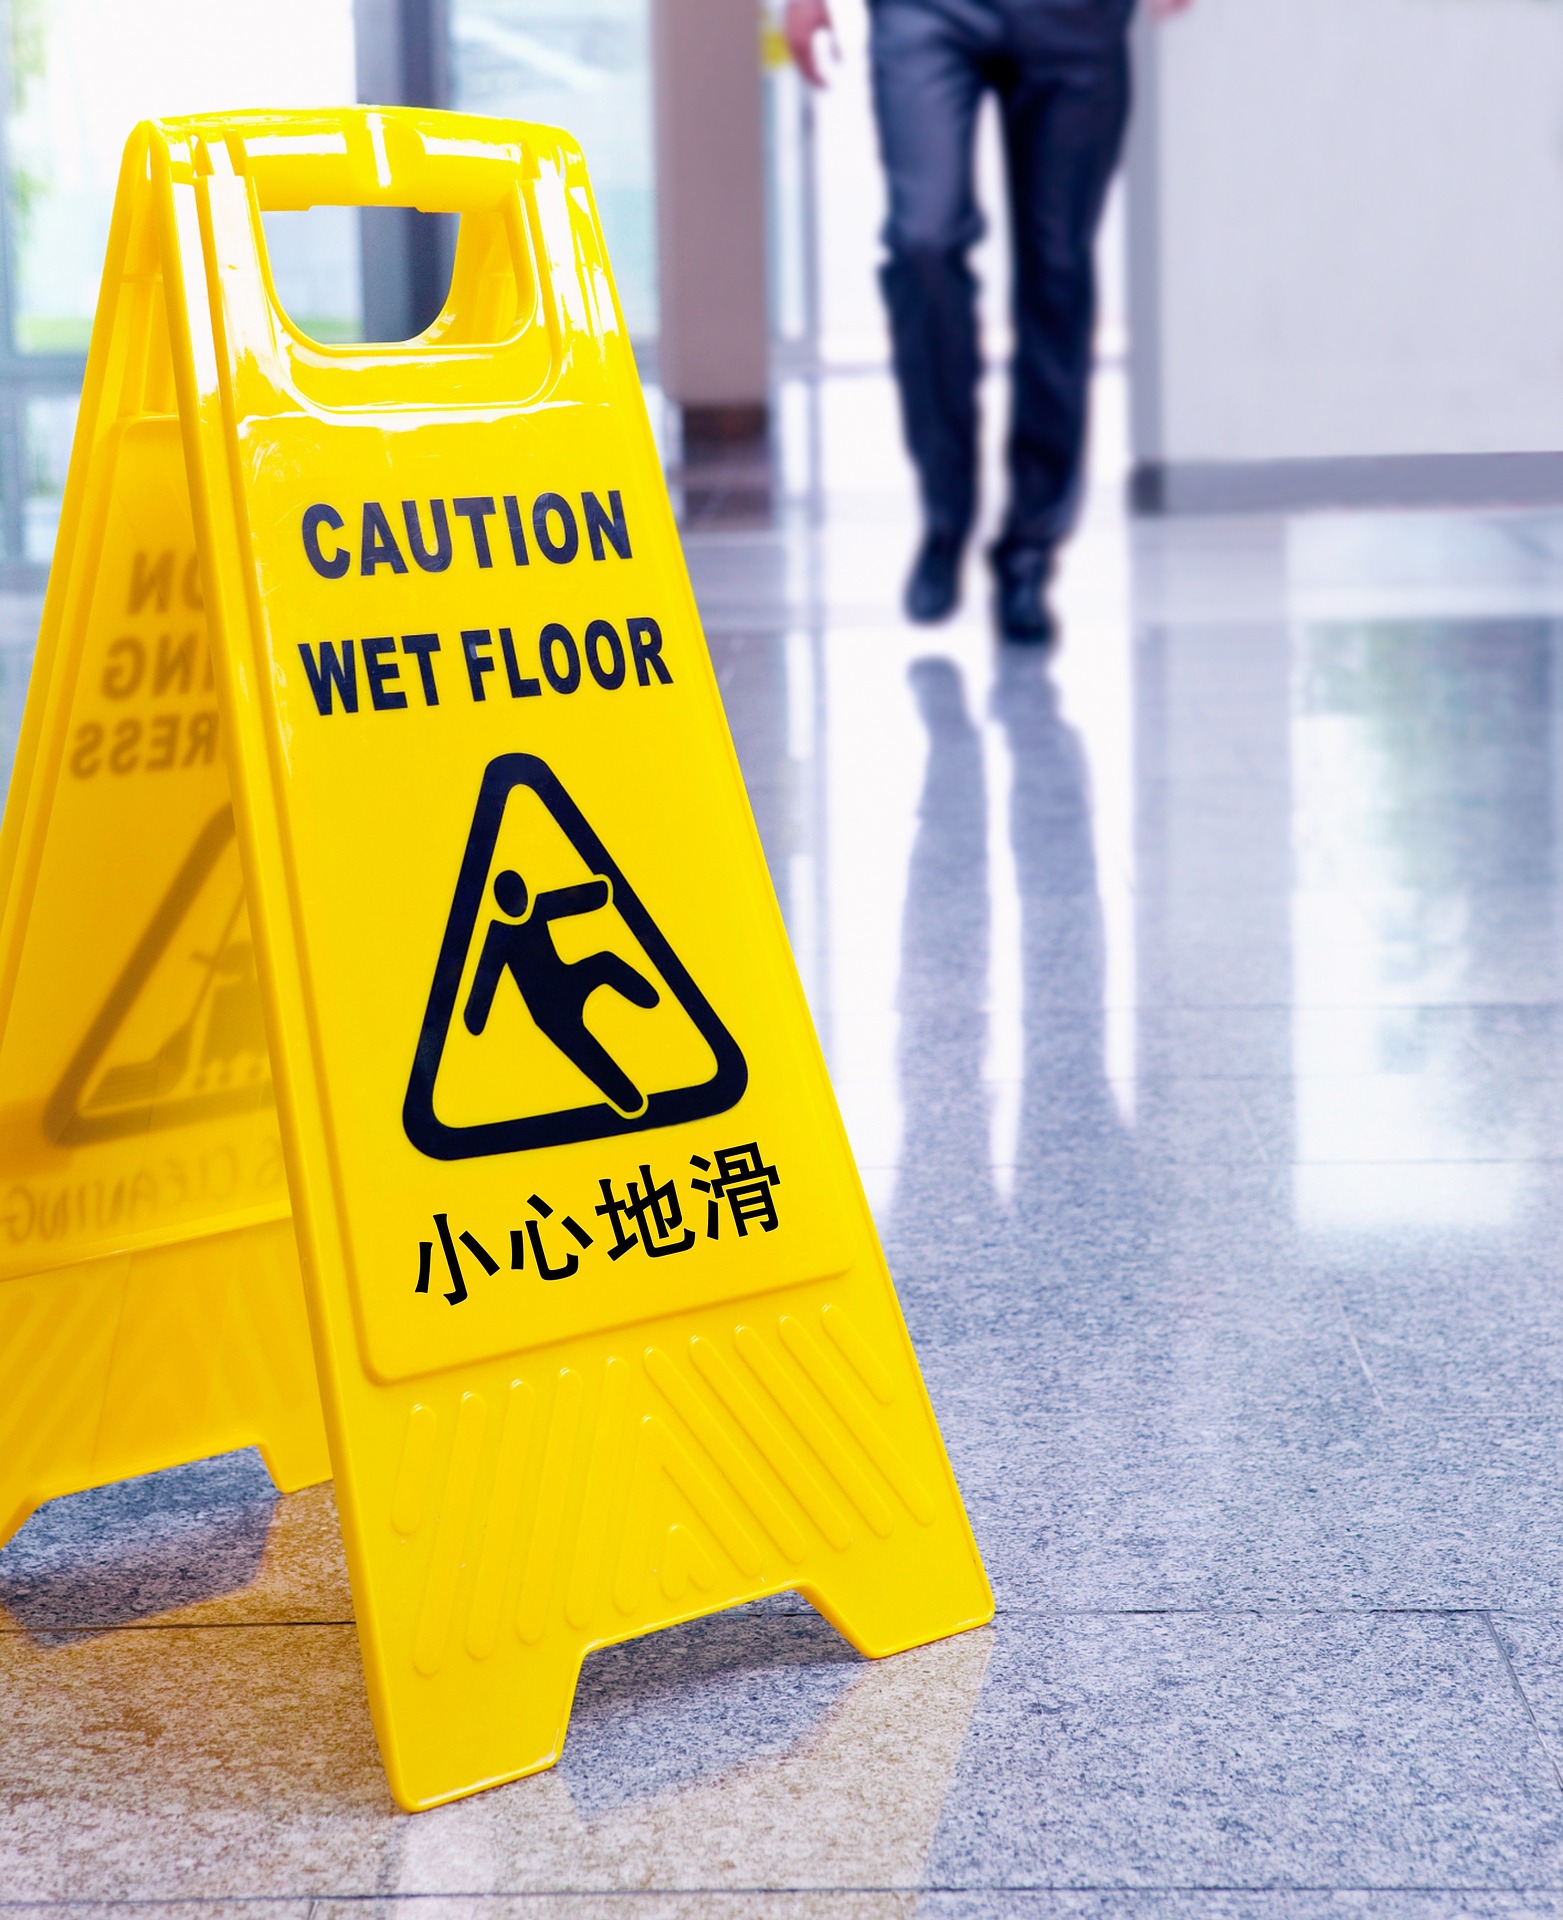 What to Do after a Slip-and-Fall Accident